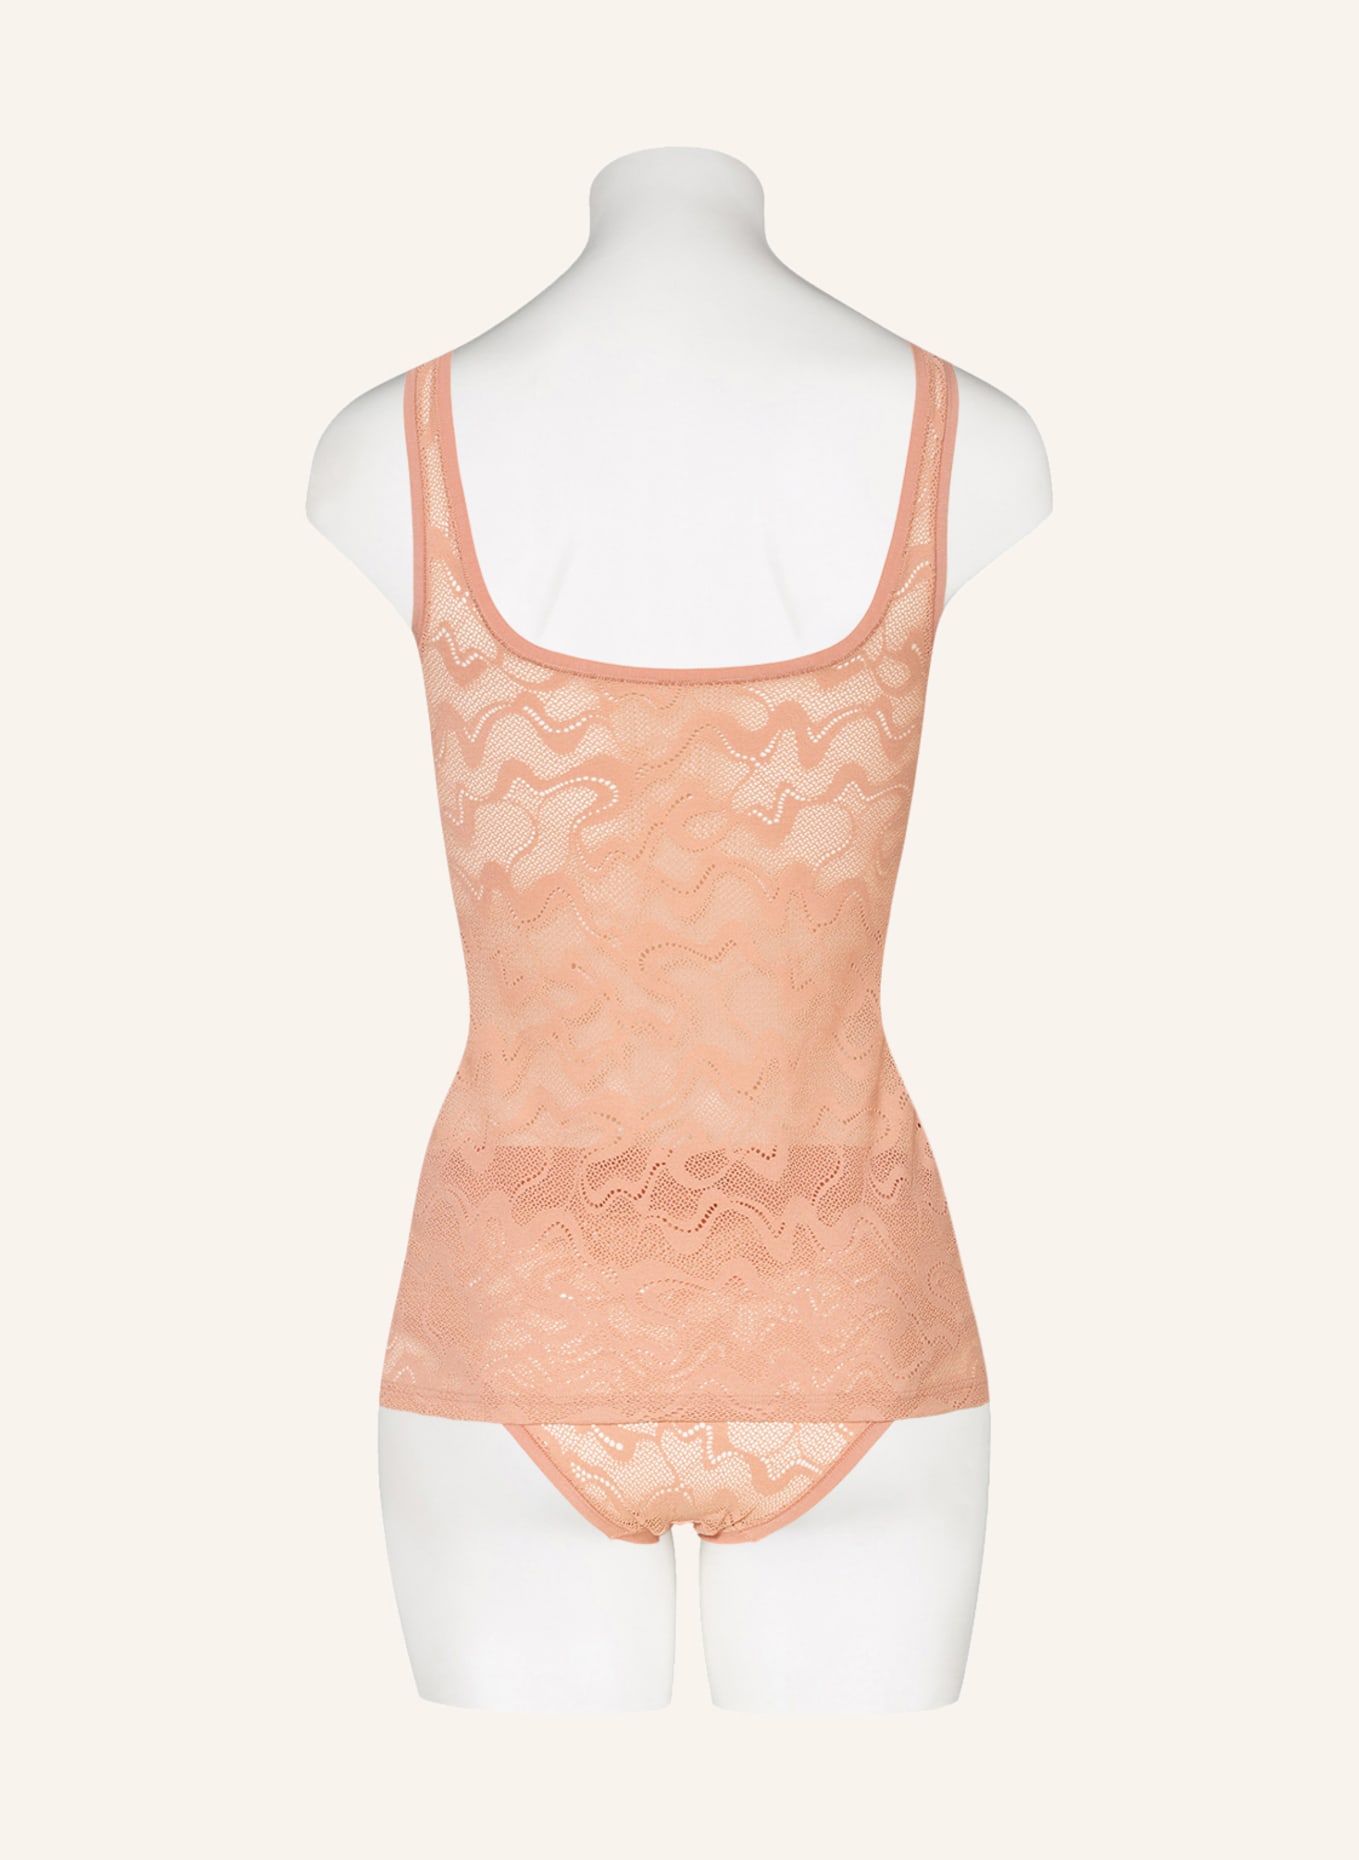 Buy Sloggi Go All-Round Lace Comfort Bralette from Next Luxembourg